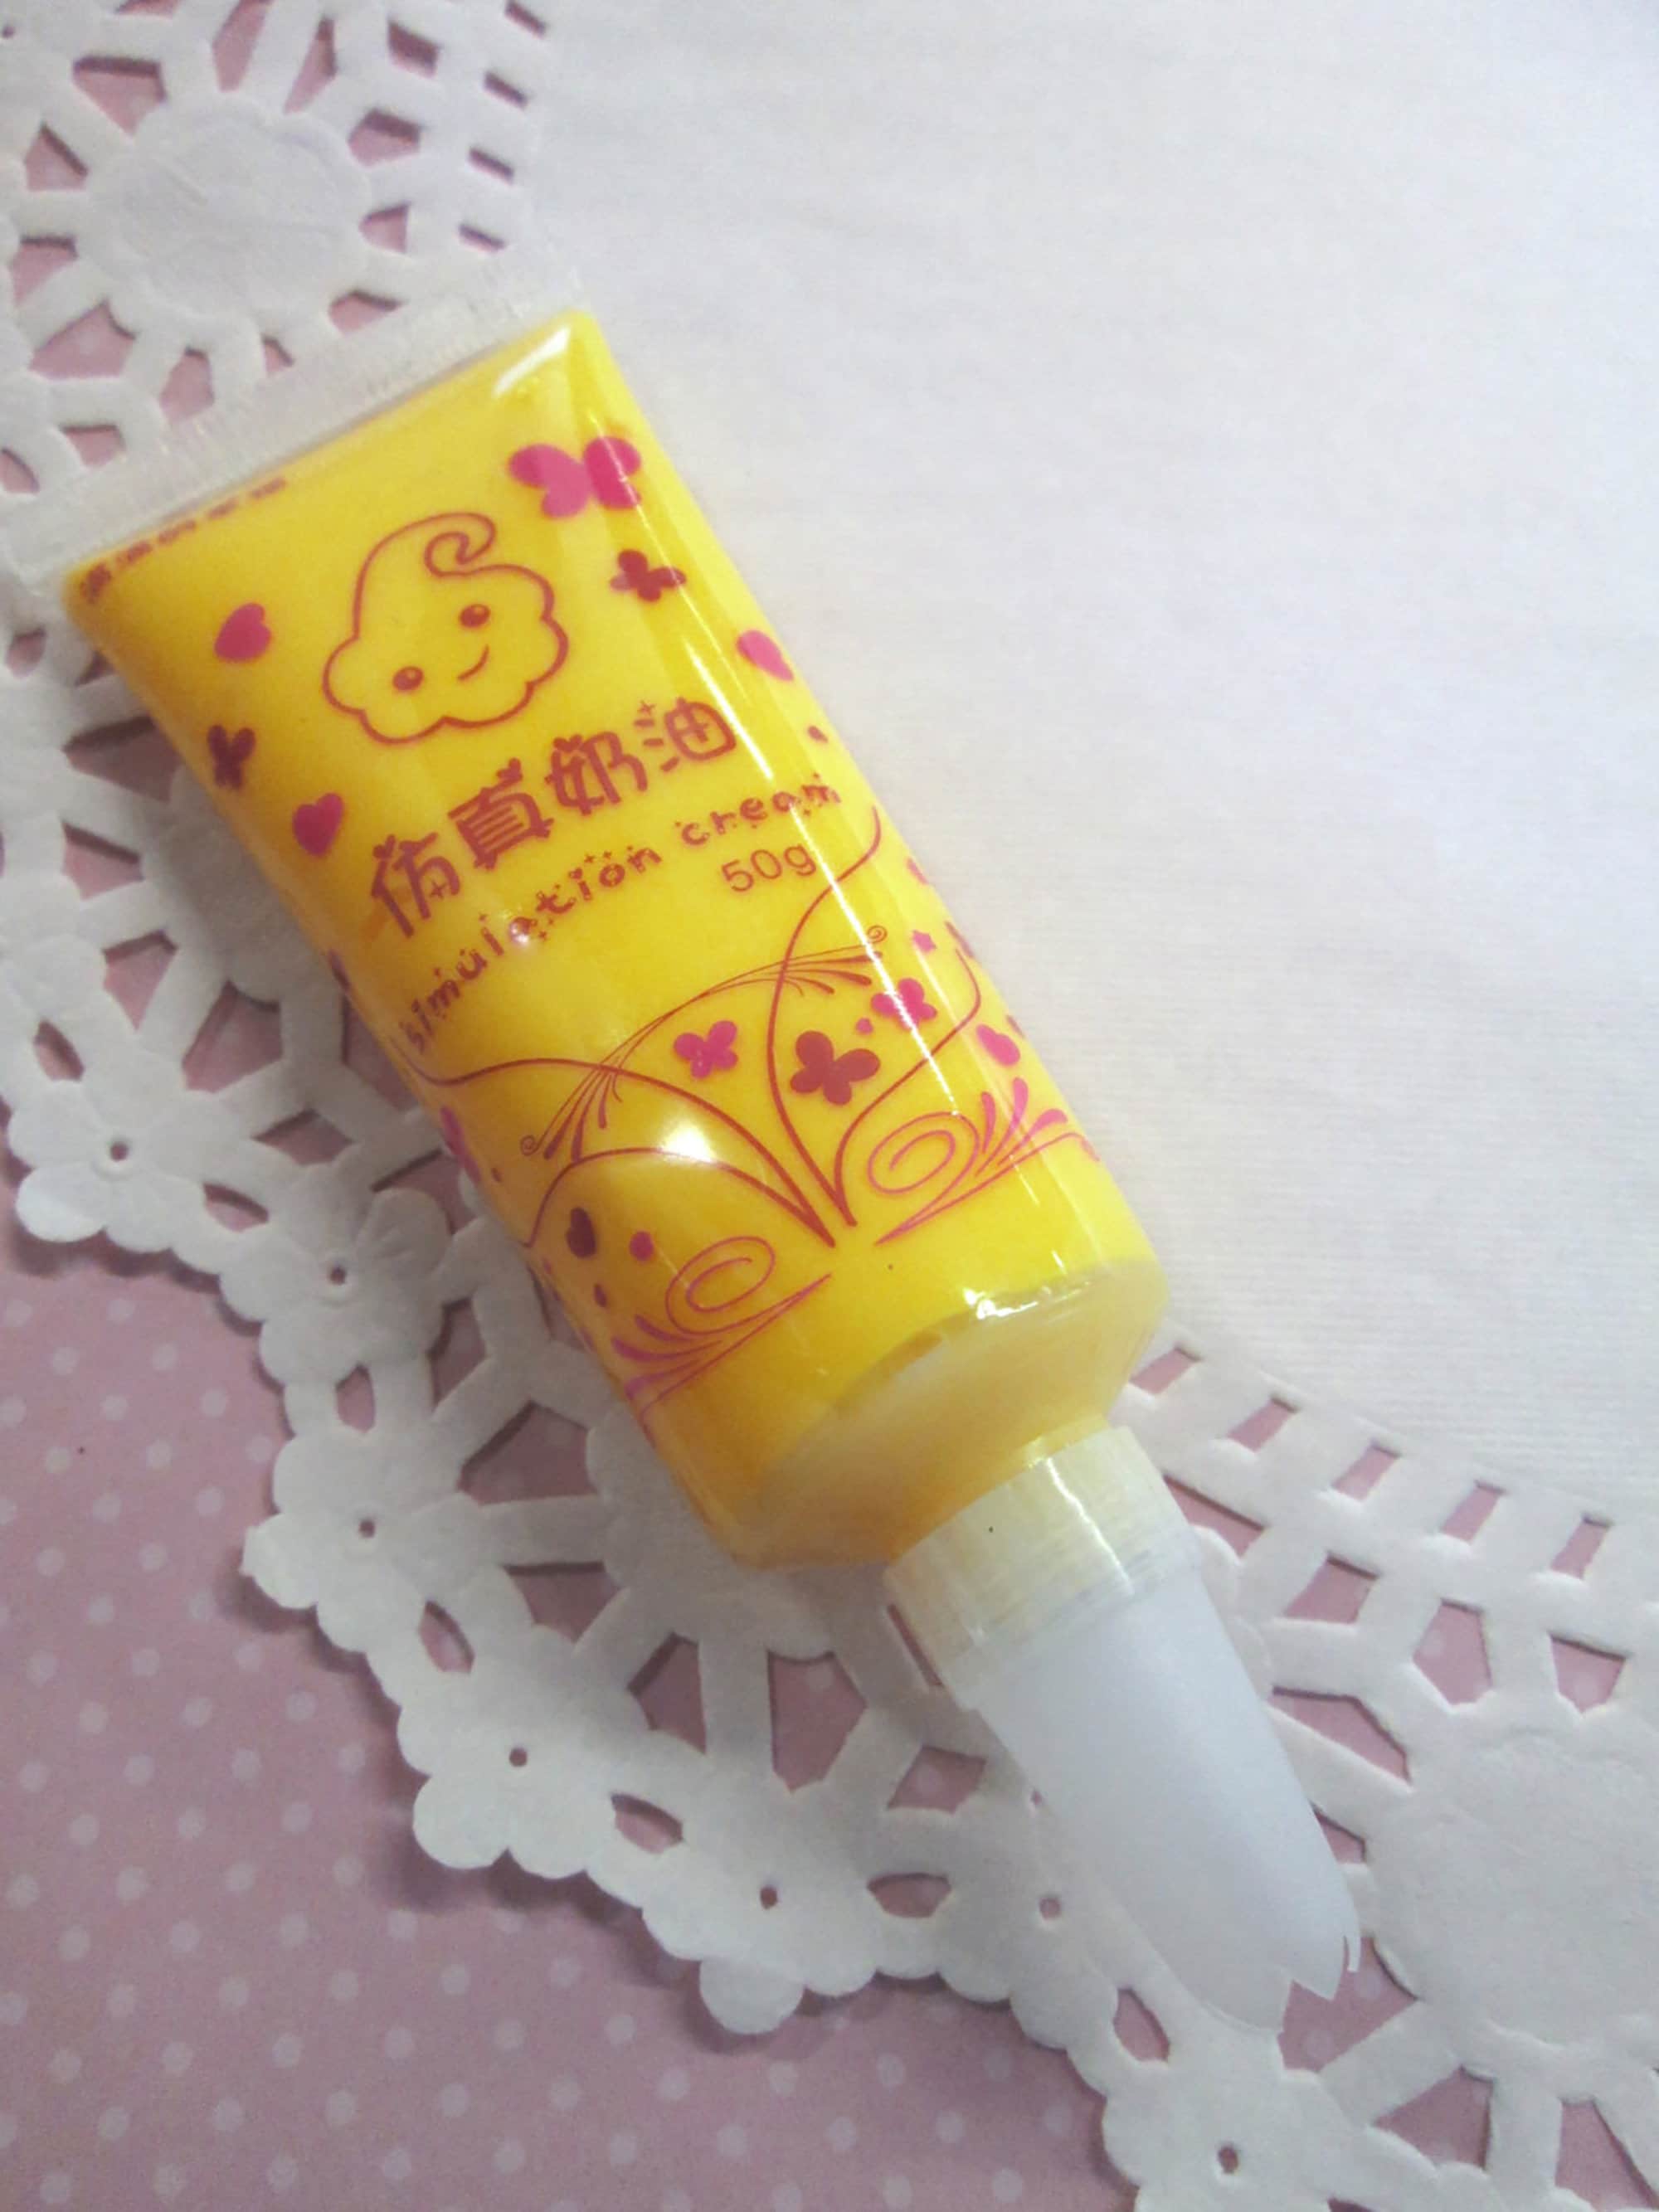 Decoden Whipped Cream Glue, Orange Yellow Color, for Cell Phone Decora –  Happy Kawaii Supplies